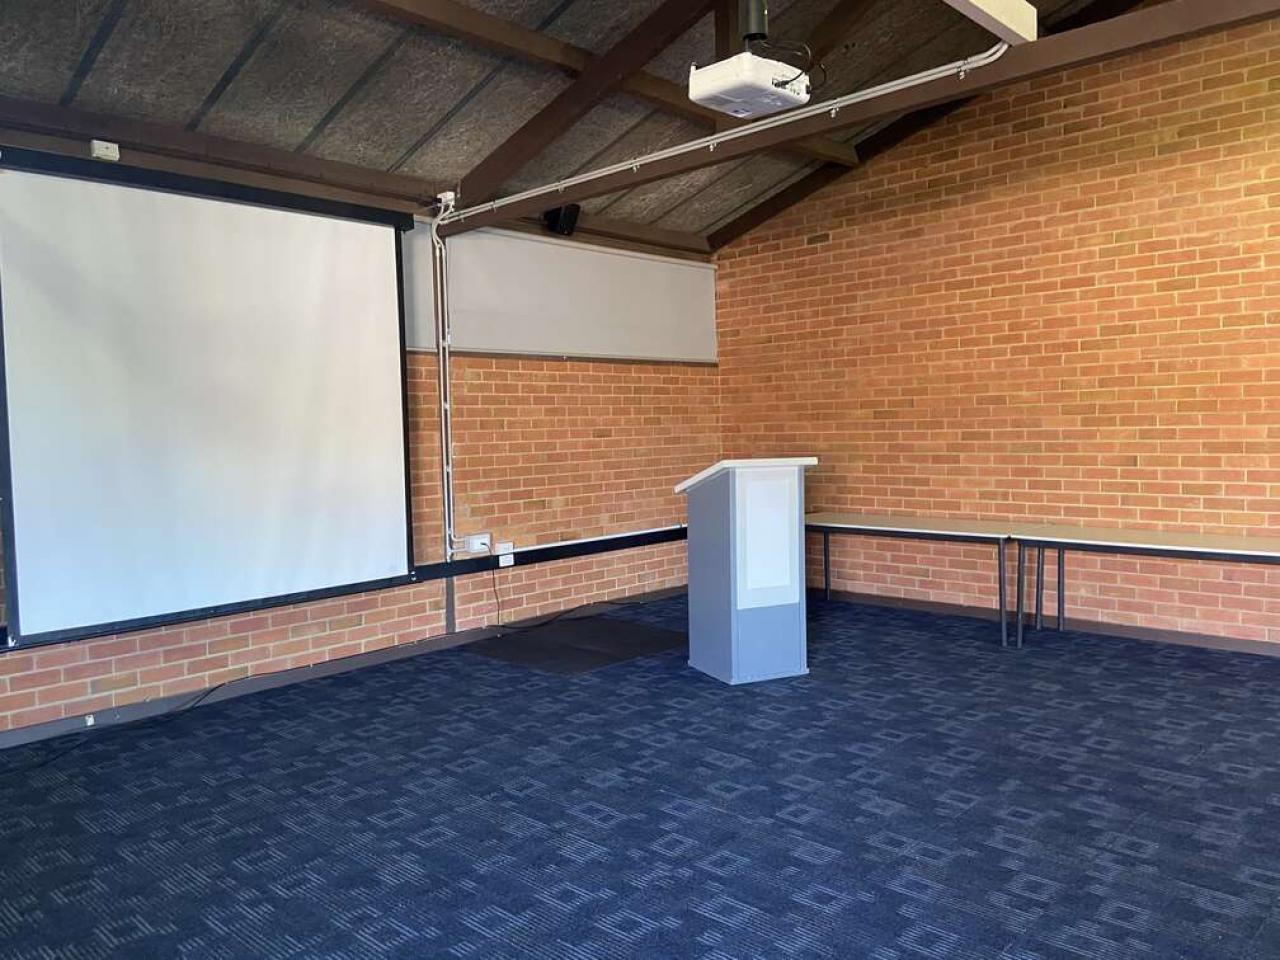 Macquarie Conference room & projector setup